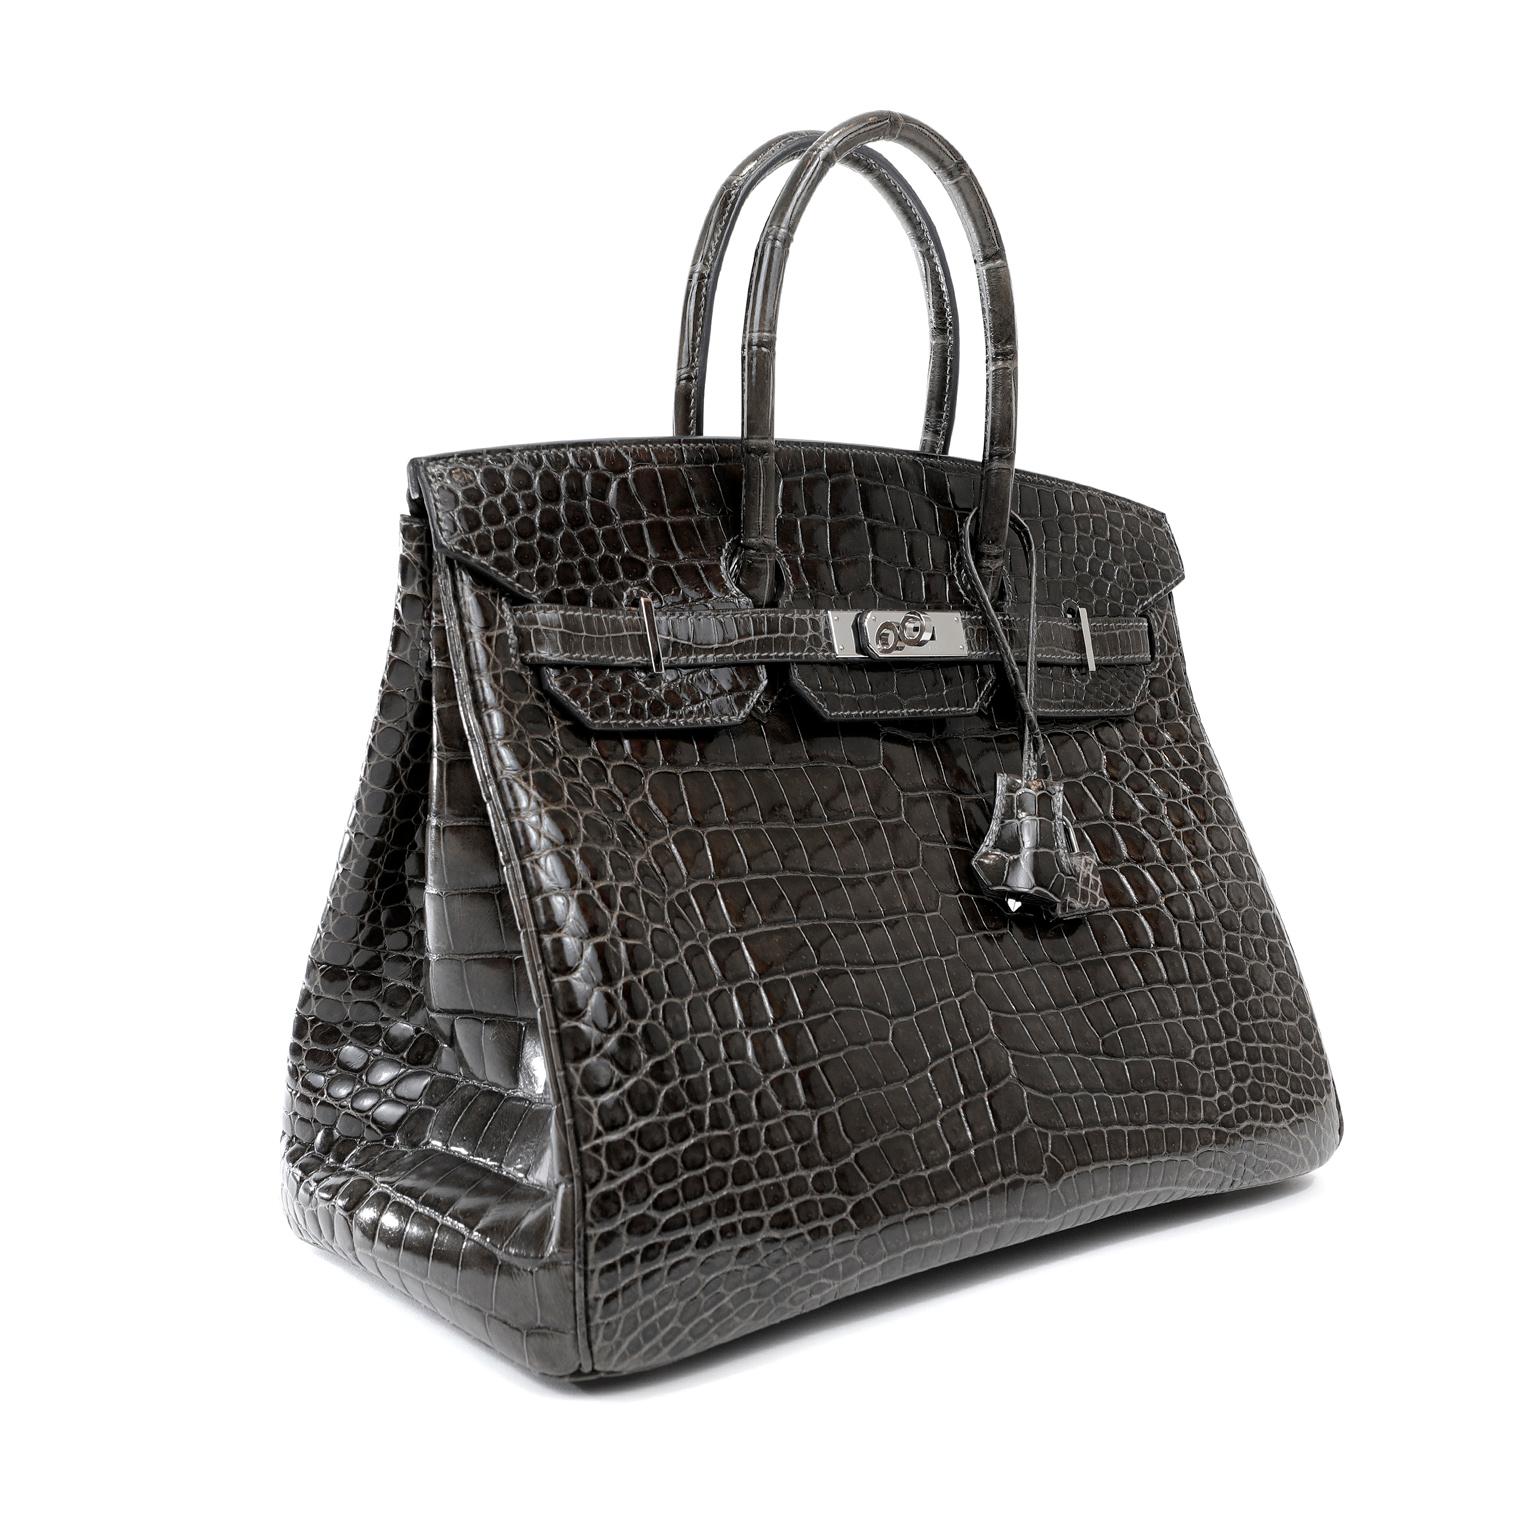 This authentic Hermès Graphite Crocodile 35 cm Birkin is in mint condition.   Hermès bags are considered the ultimate luxury item the world over.  Hand stitched by skilled craftsmen, wait lists of a year or more are commonplace for the leather